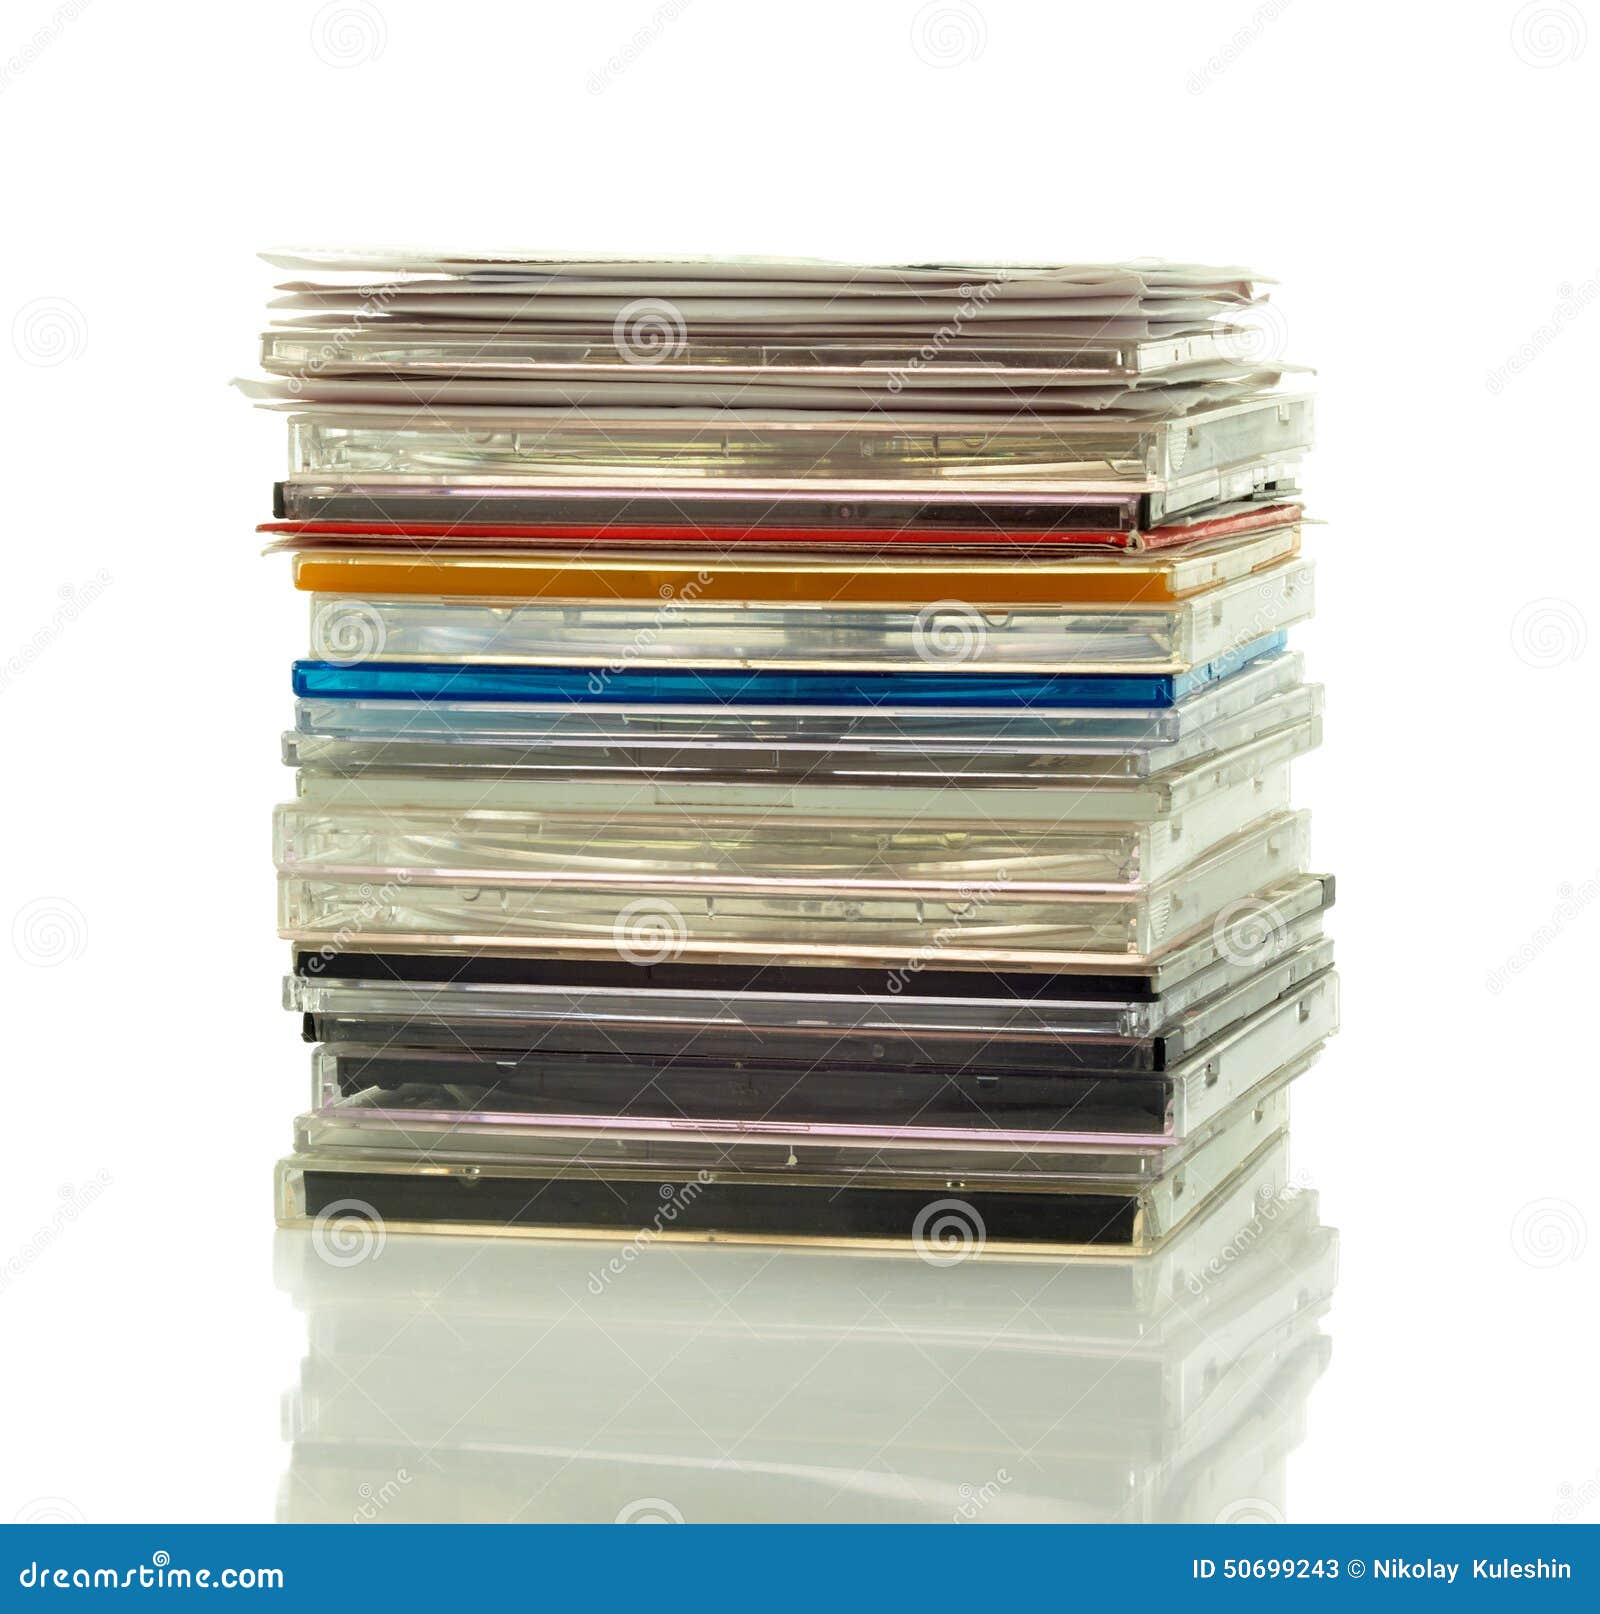 Stack of CDs in boxes stock image. Image of objects, white - 50699243